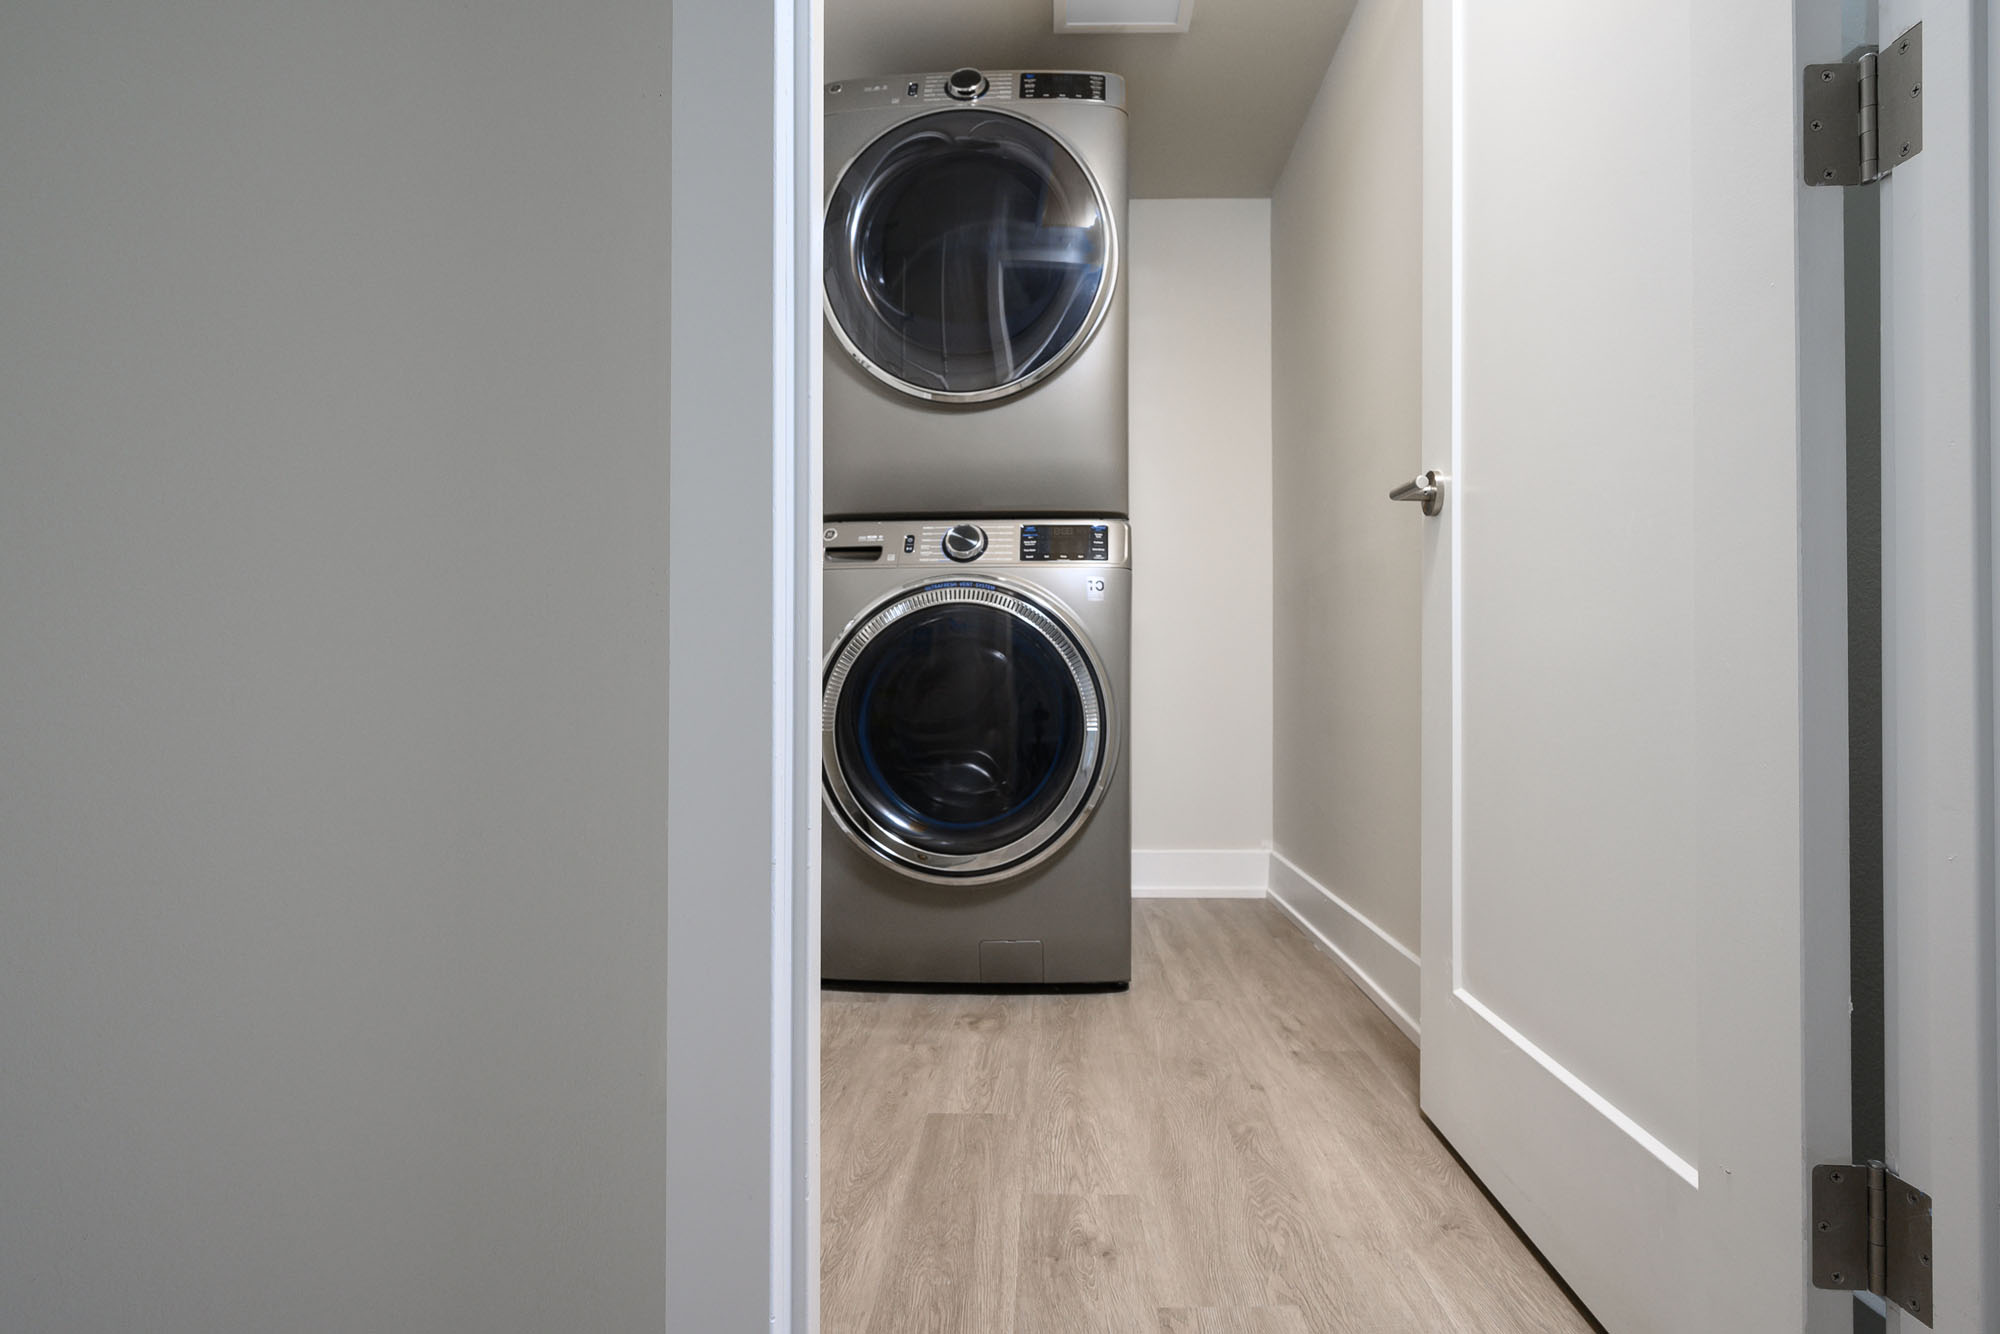 GE large capacity front-load washer and dryer in satin nickel in oversized laundry